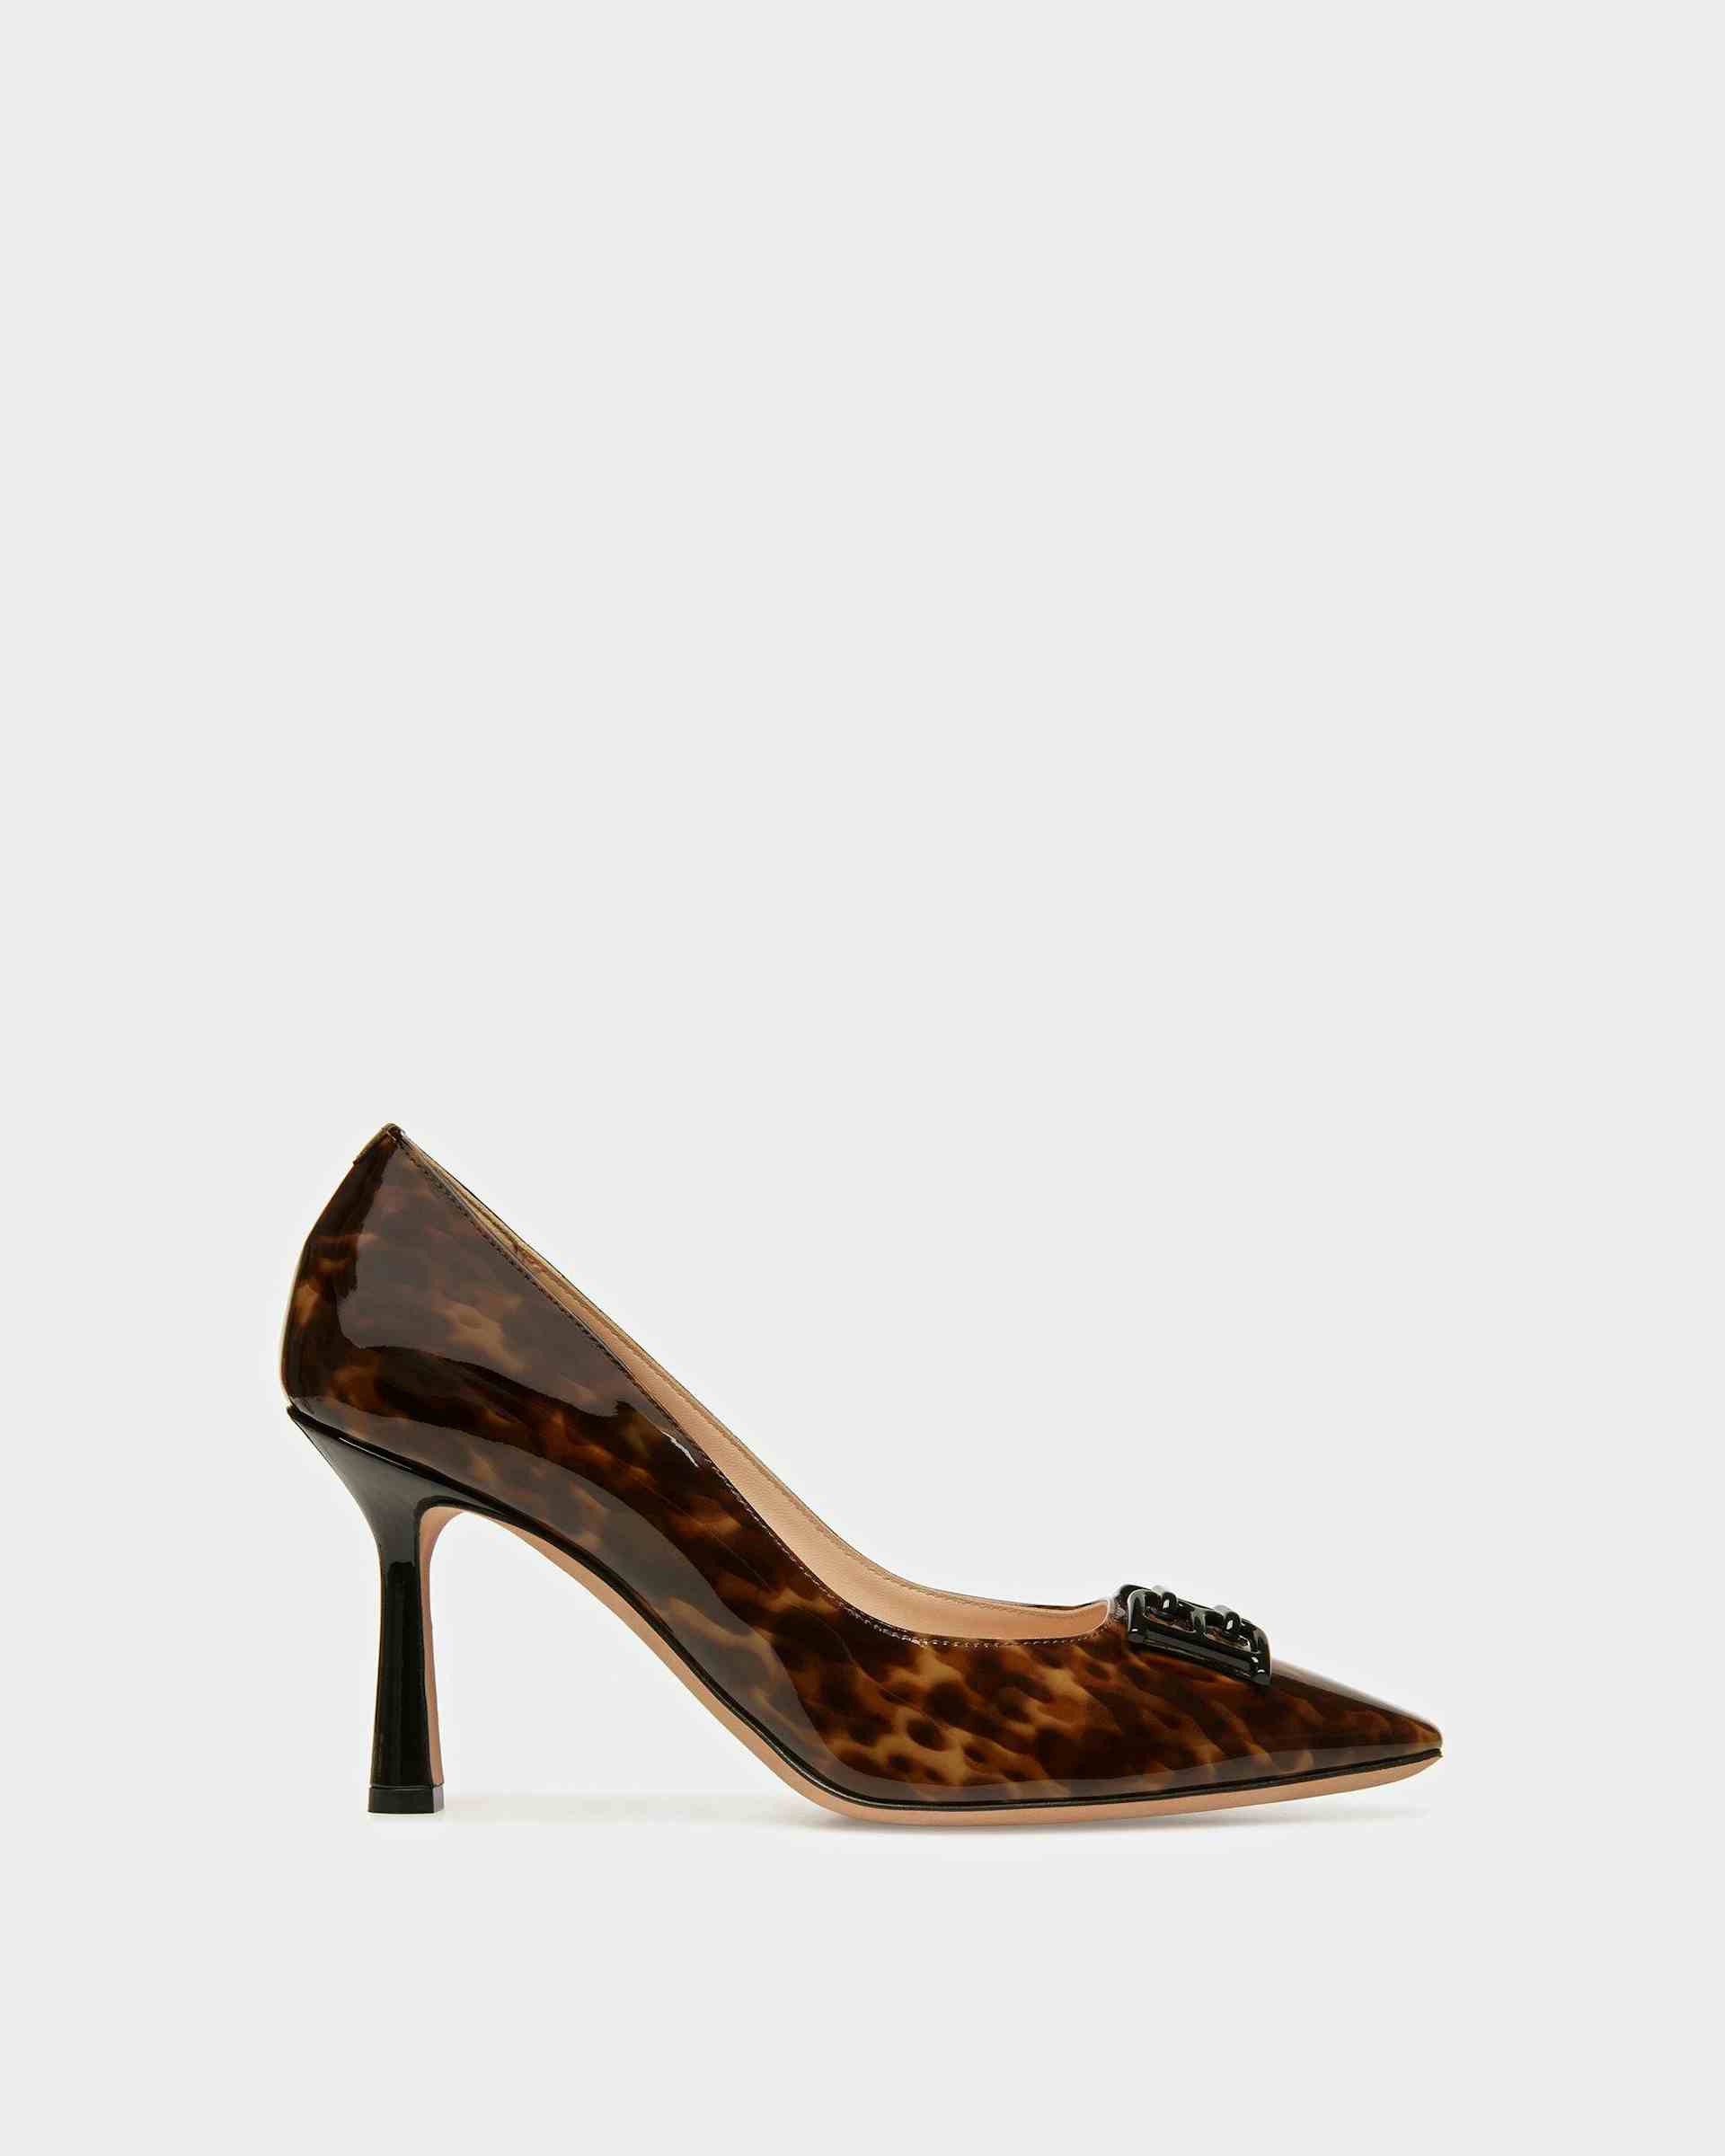 Evanca Leather Pumps In Black And Brown - Women's - Bally